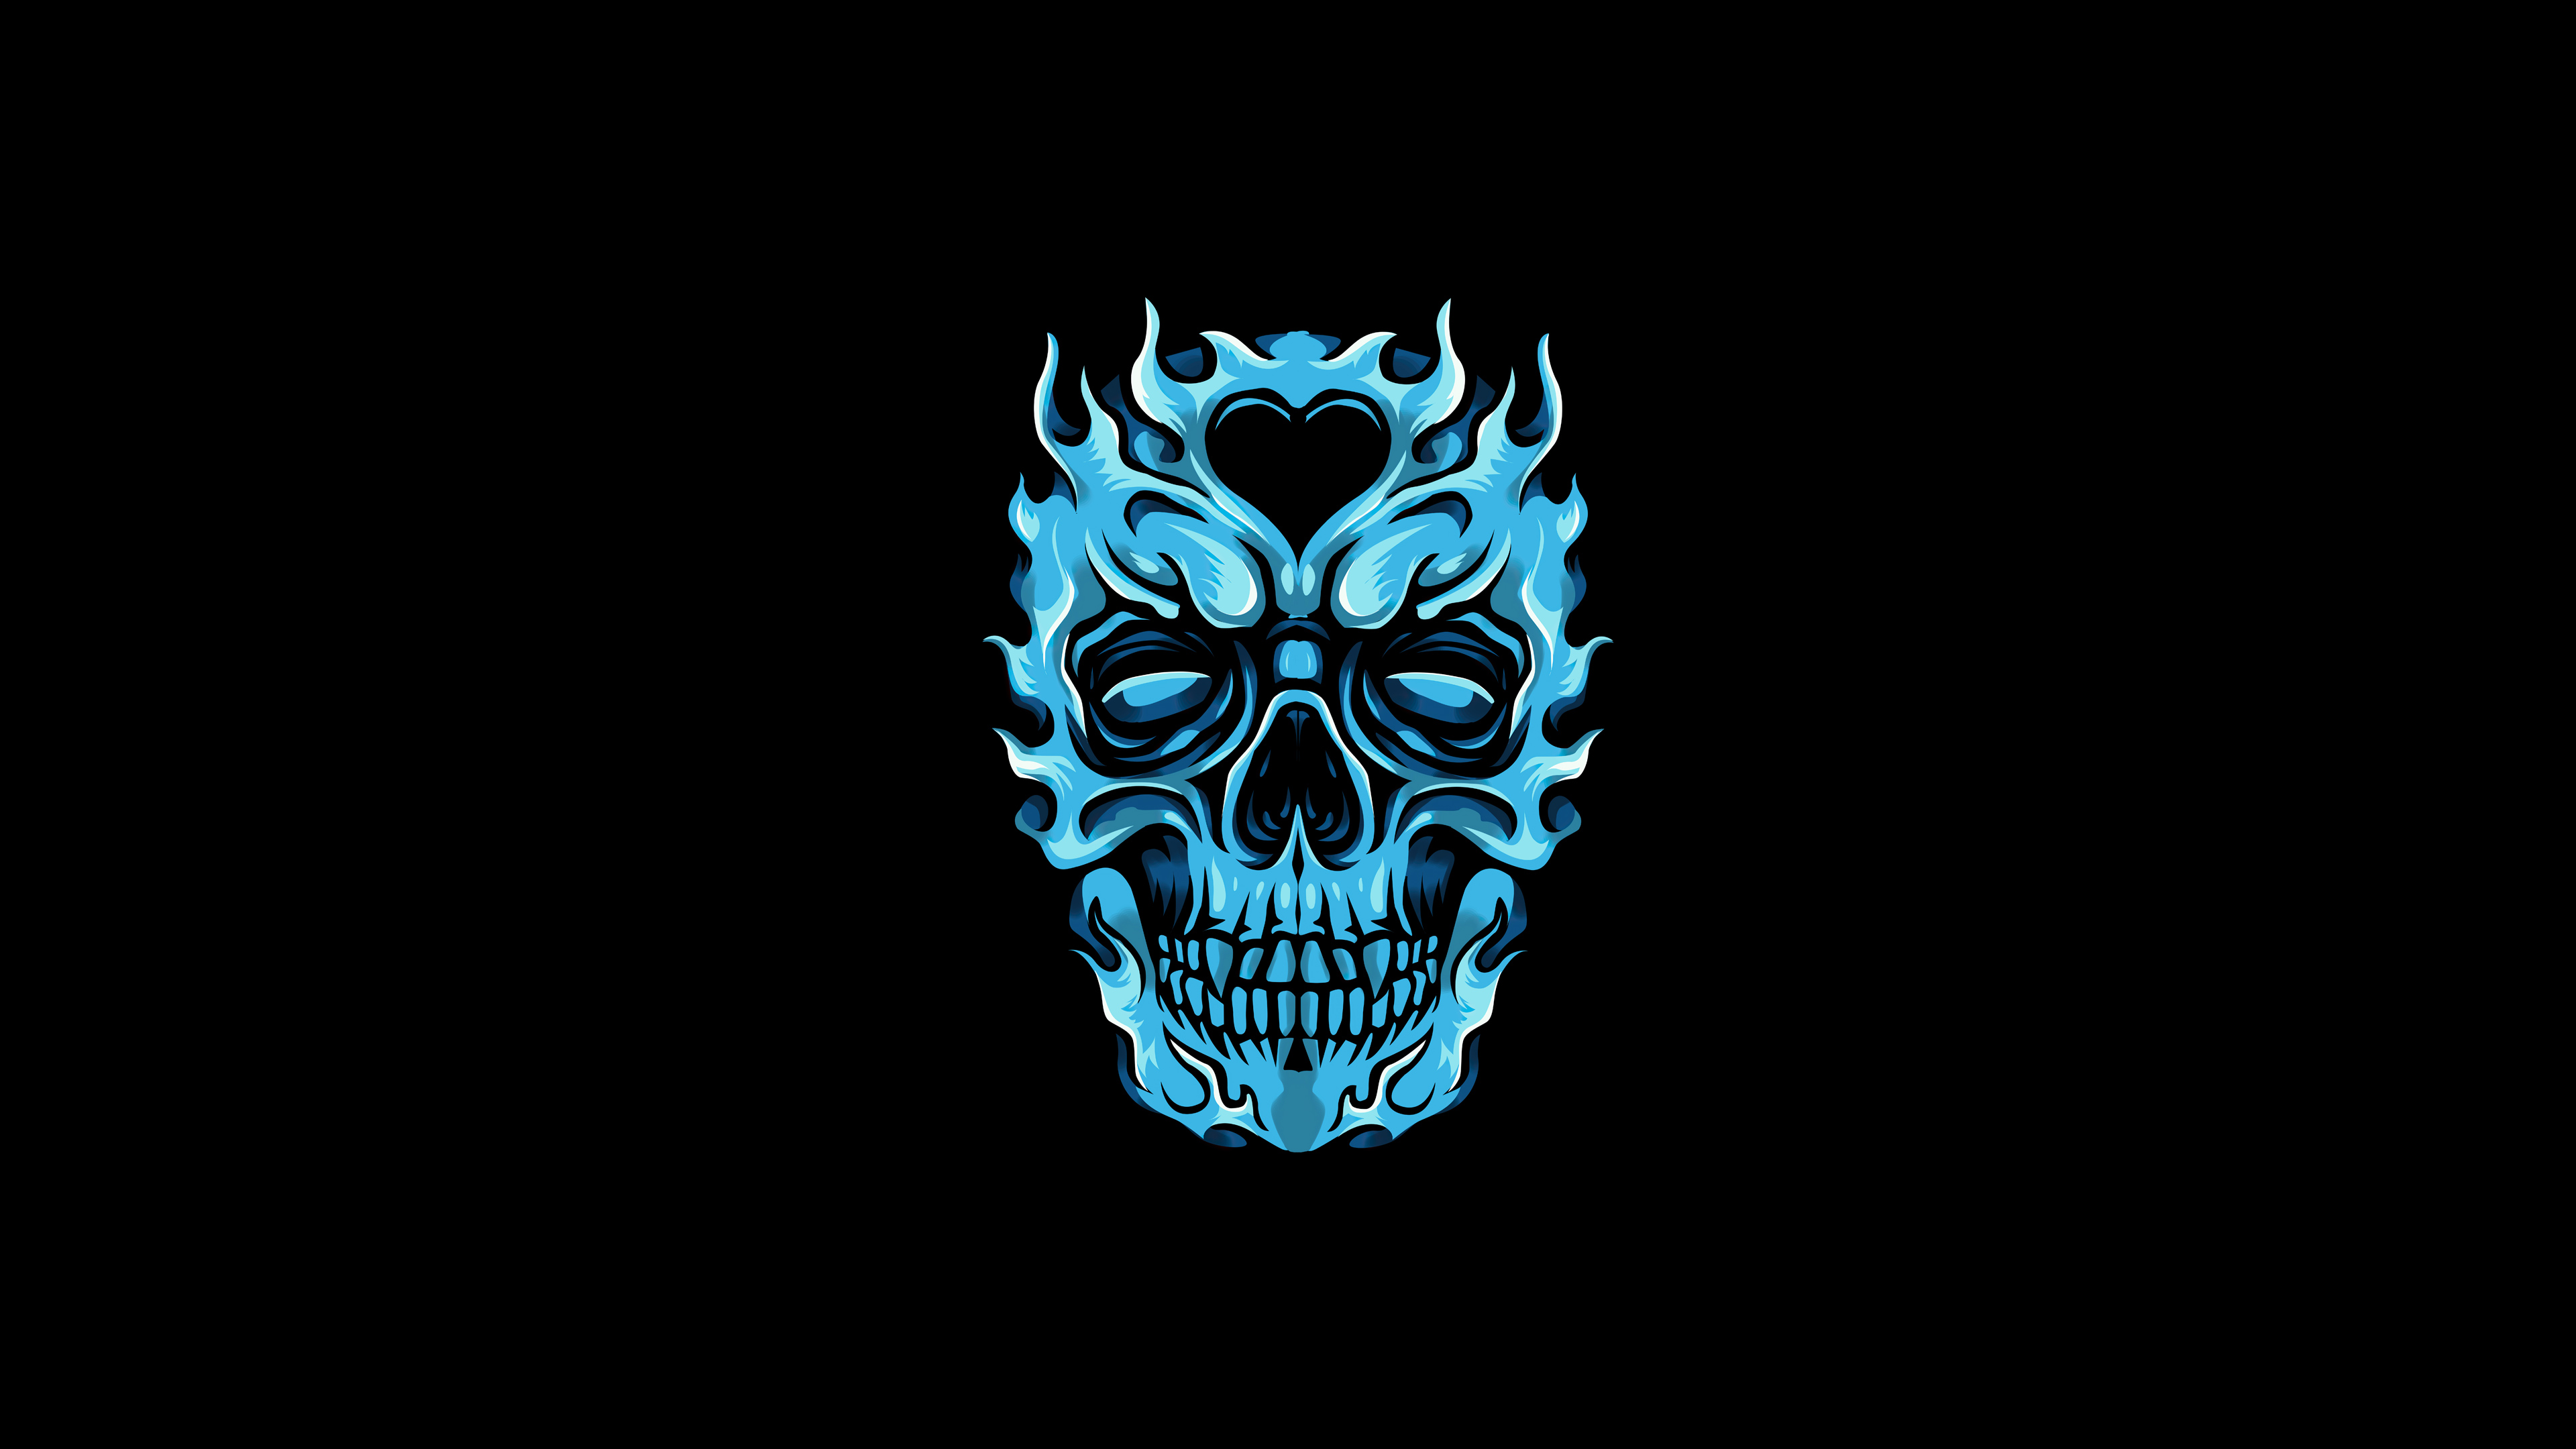 Blue Skull wallpaper by shaneandsherry  Download on ZEDGE  7a8f